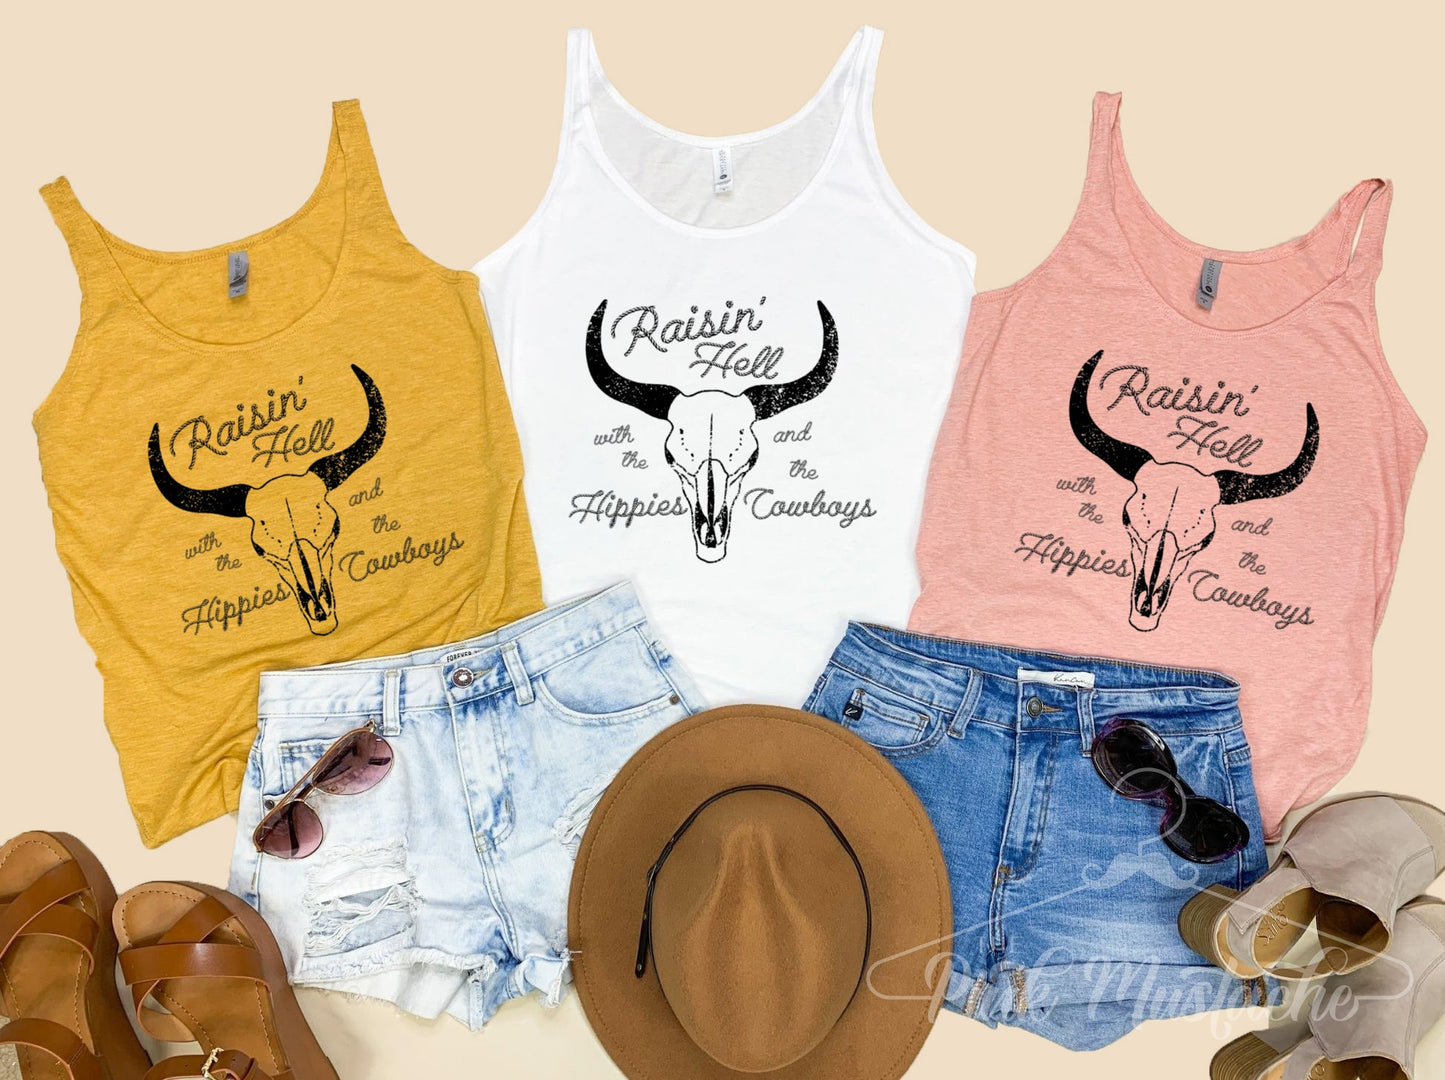 Raisin' Hell with the Hippies and Cowboys Western Style Tank Top/ Adult Sizes/ NOT FITTED